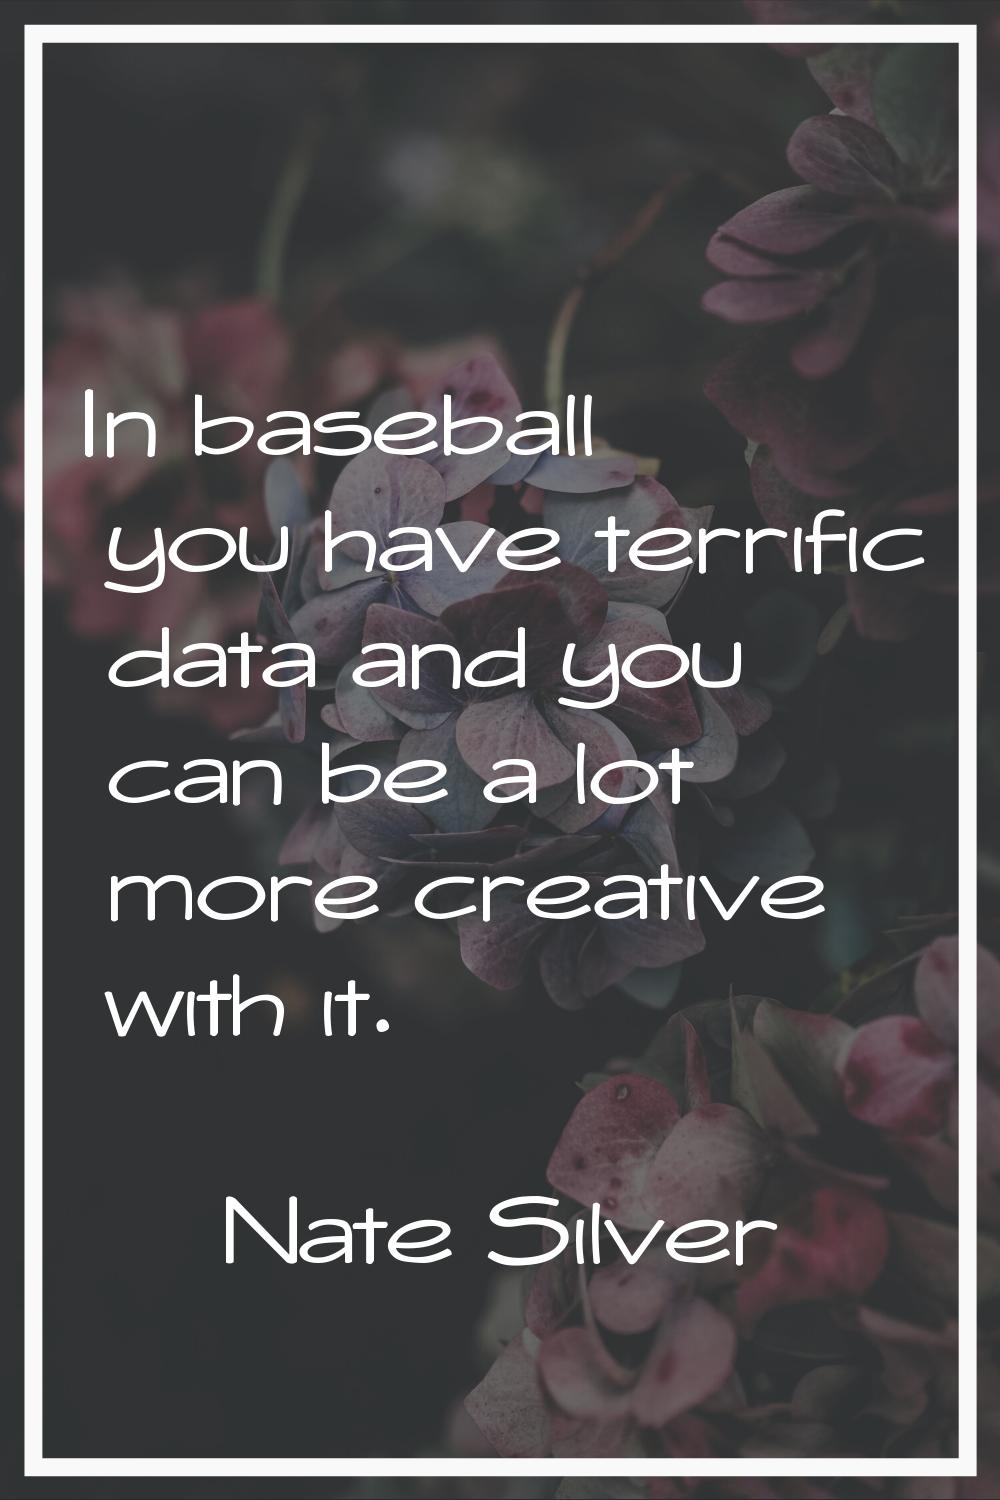 In baseball you have terrific data and you can be a lot more creative with it.